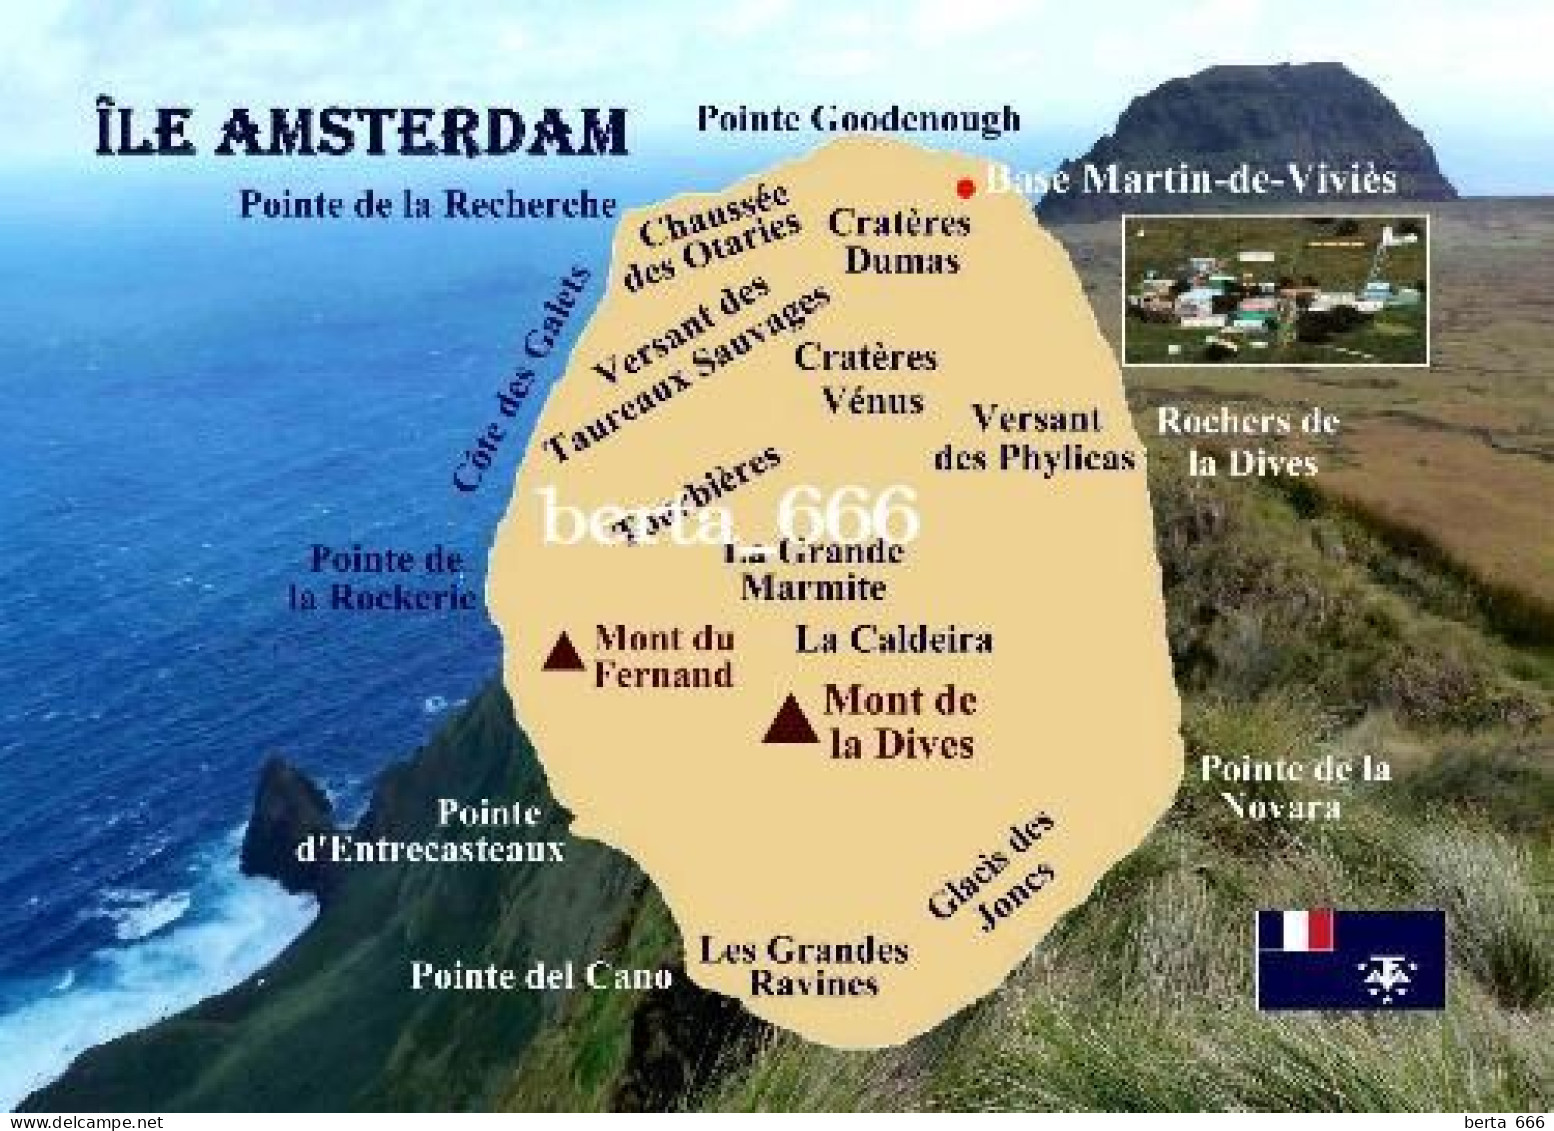 TAAF Amsterdam Island Map UNESCO New Postcard * Carte Geographique * Landkarte - TAAF : French Southern And Antarctic Lands